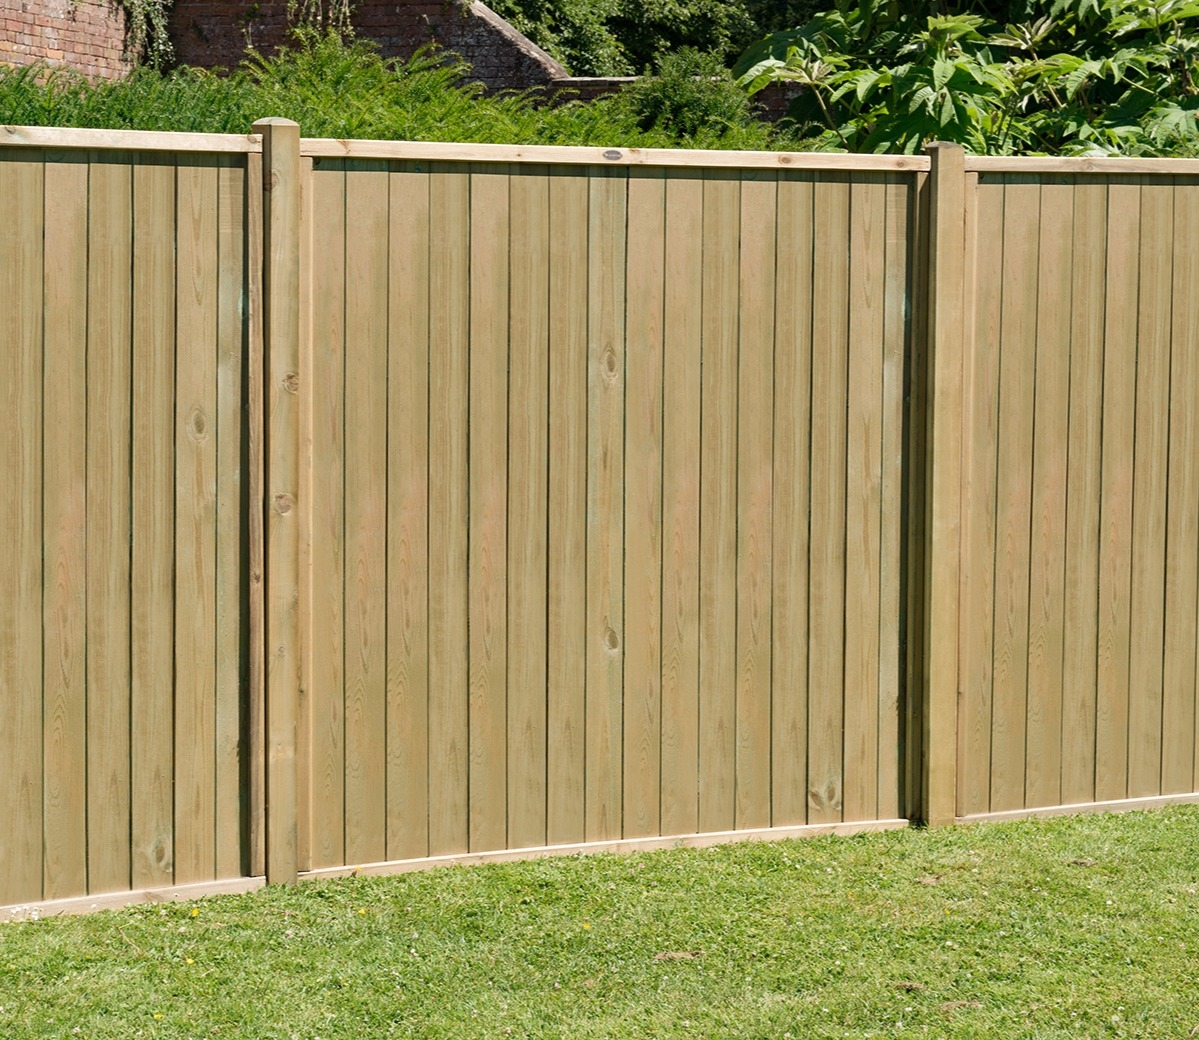 Cheap Garden Wood Fence Panels Pressure Treated 1828mm x 1828mm 6x6ft 